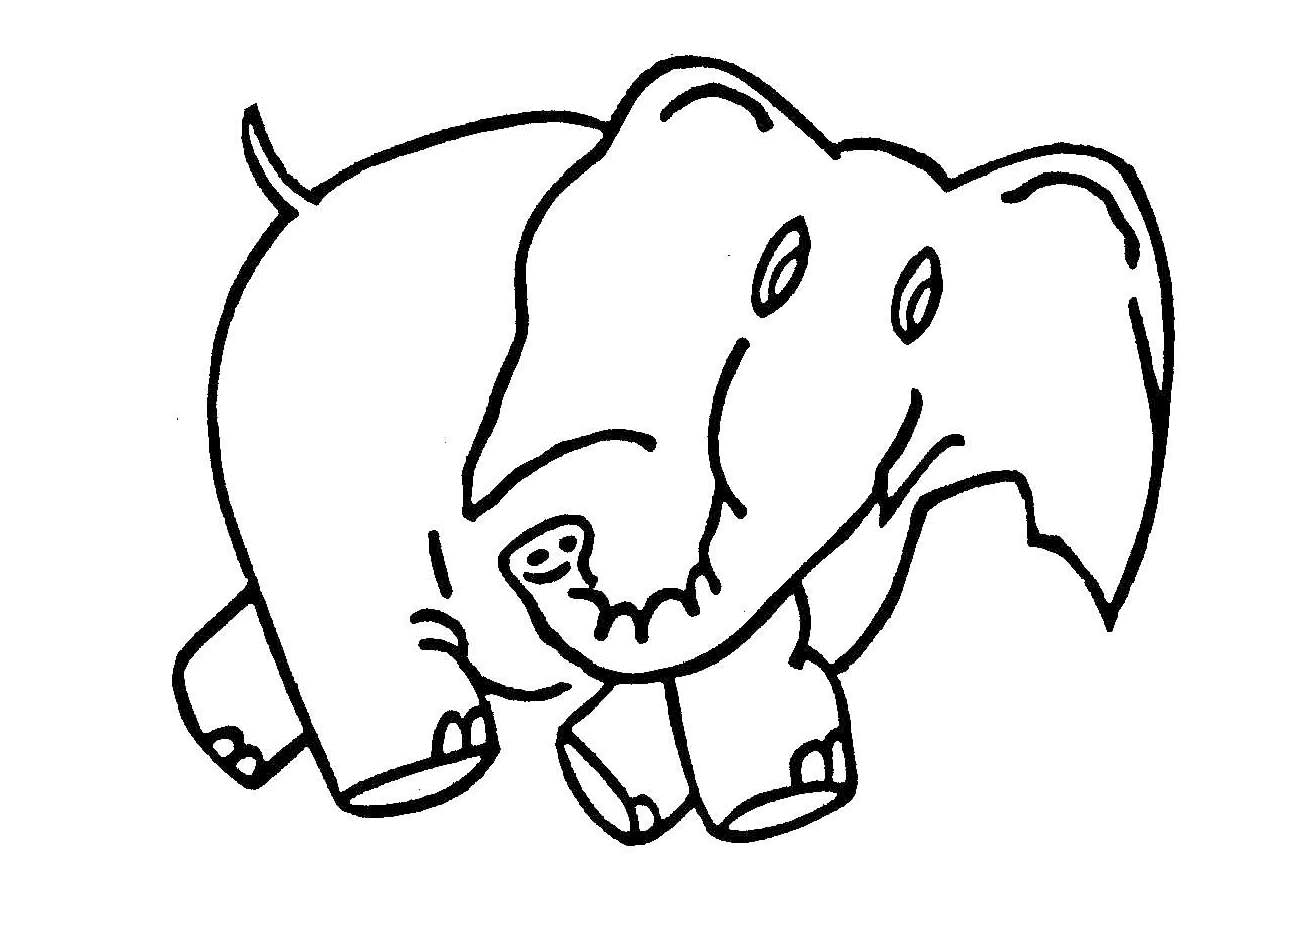 Elephant Drawings For Kids - Clipart library